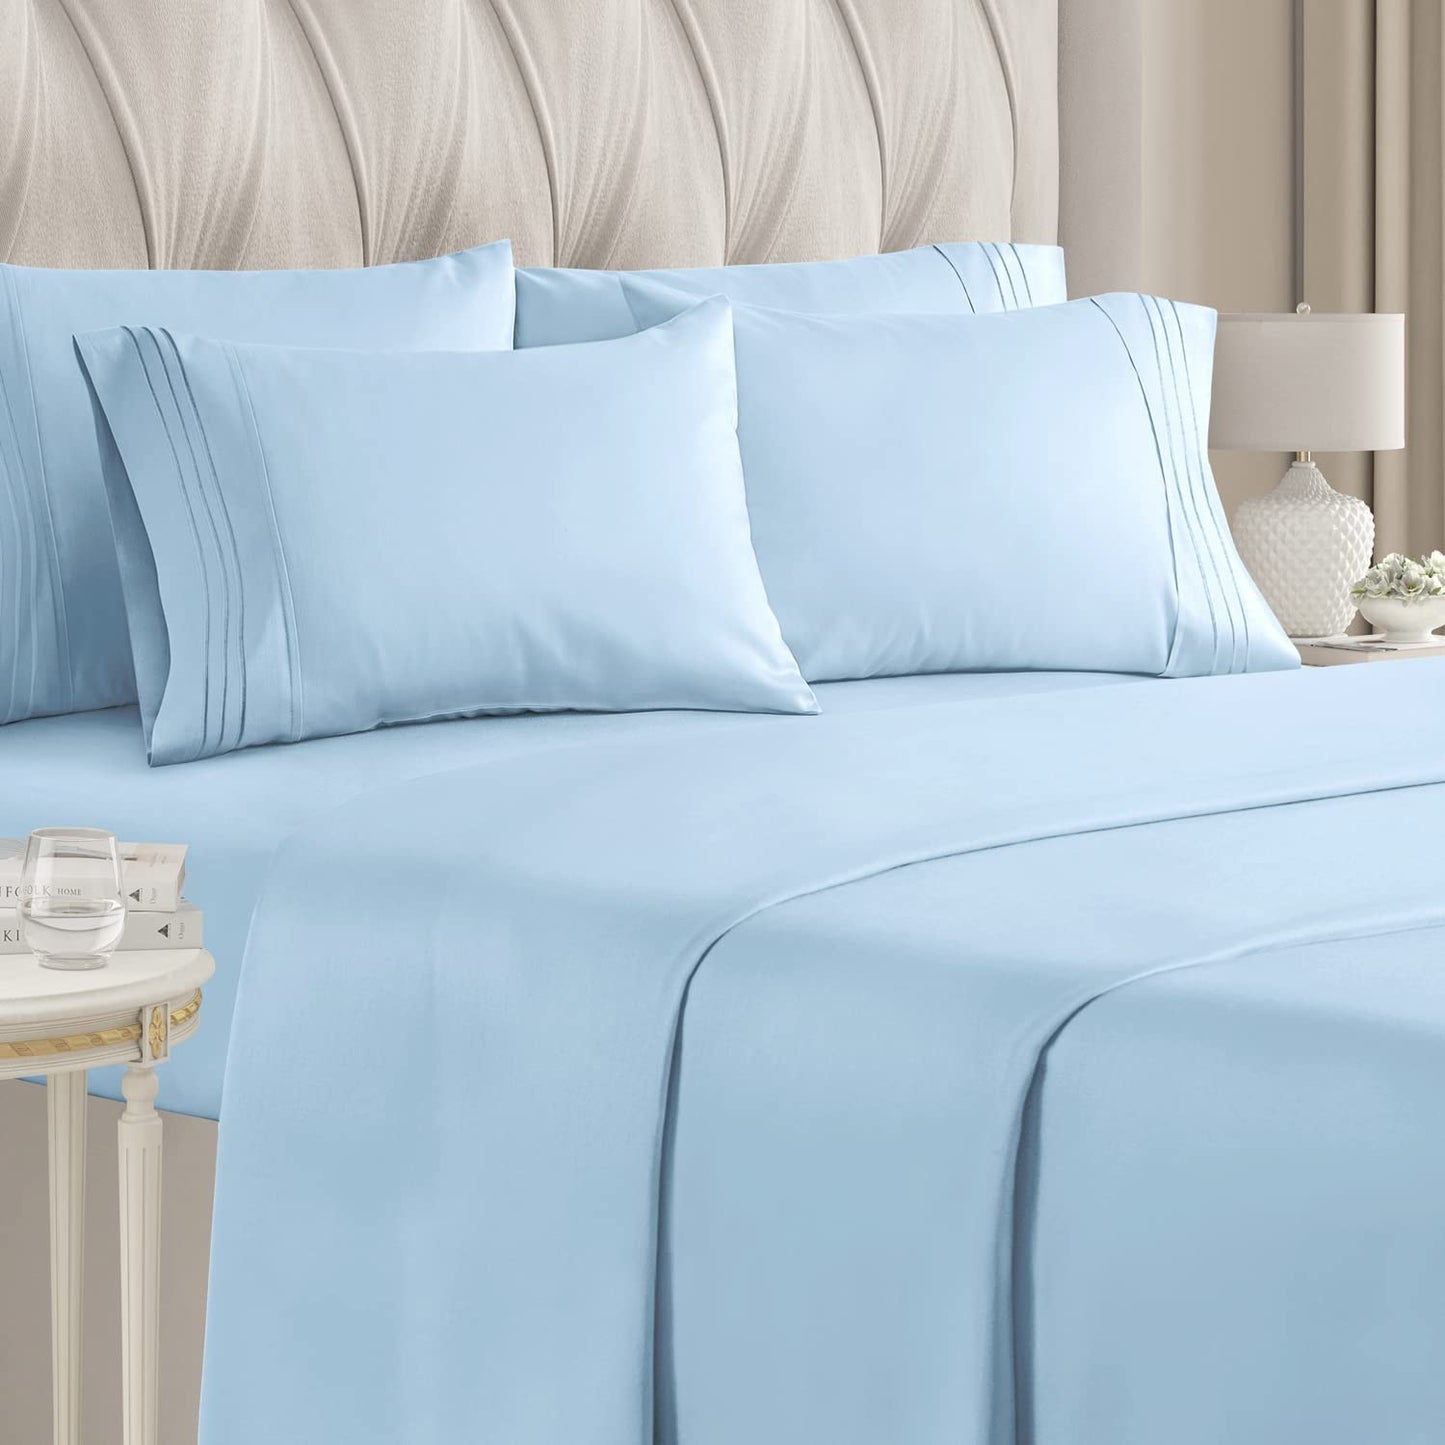 Buy 1000 Thread Count Stripe Blue Sheet Set Egyptian Cotton at Egyptianhomelinens.com